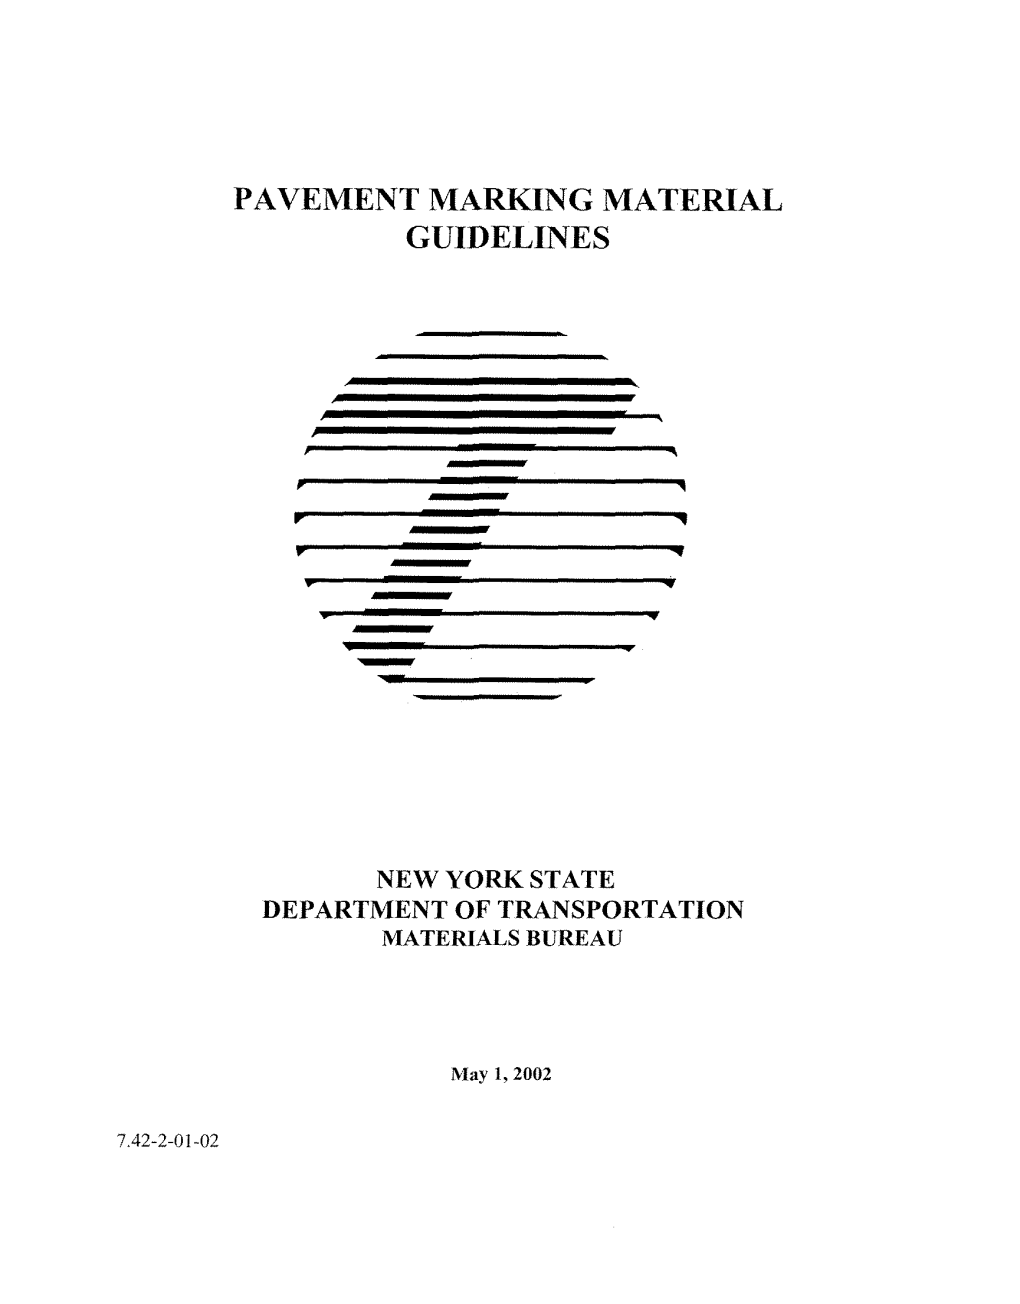 Pavement Marking Material Guidelines